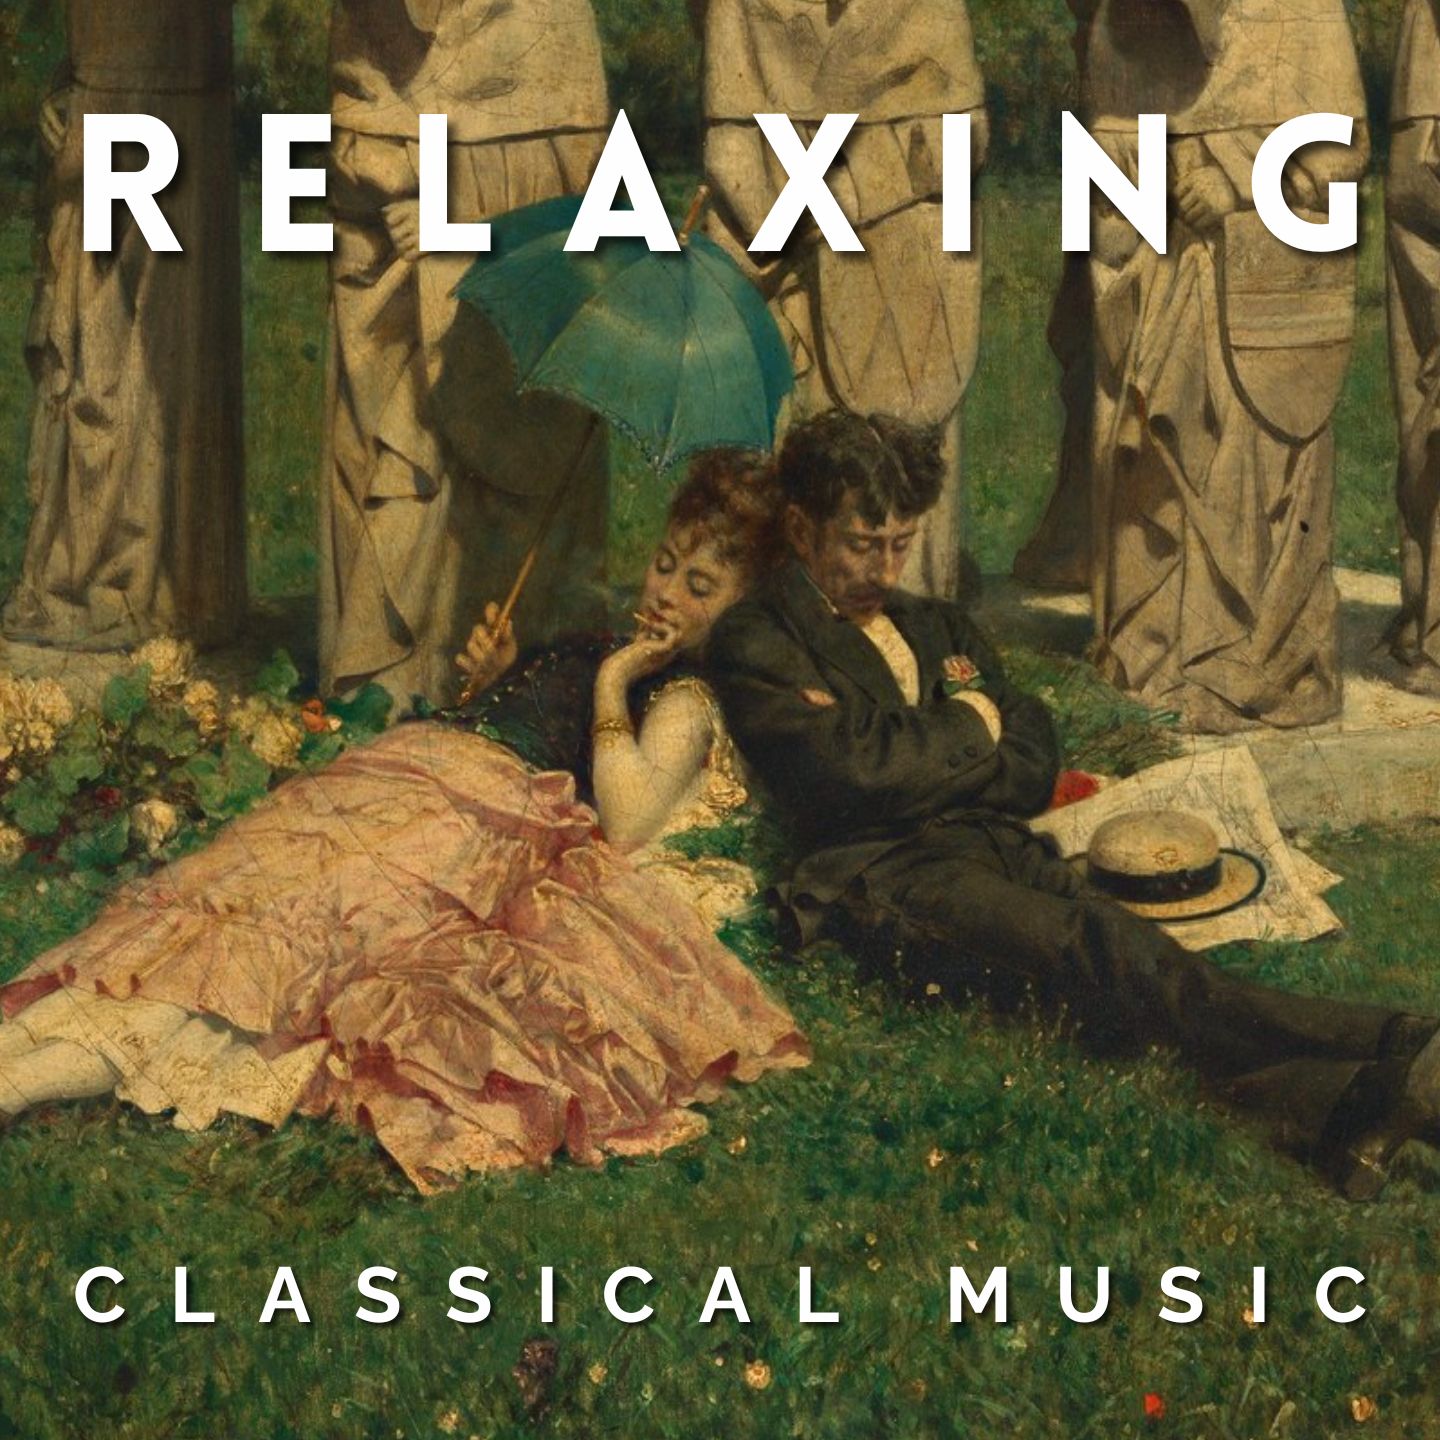  Classical Music for Relaxation